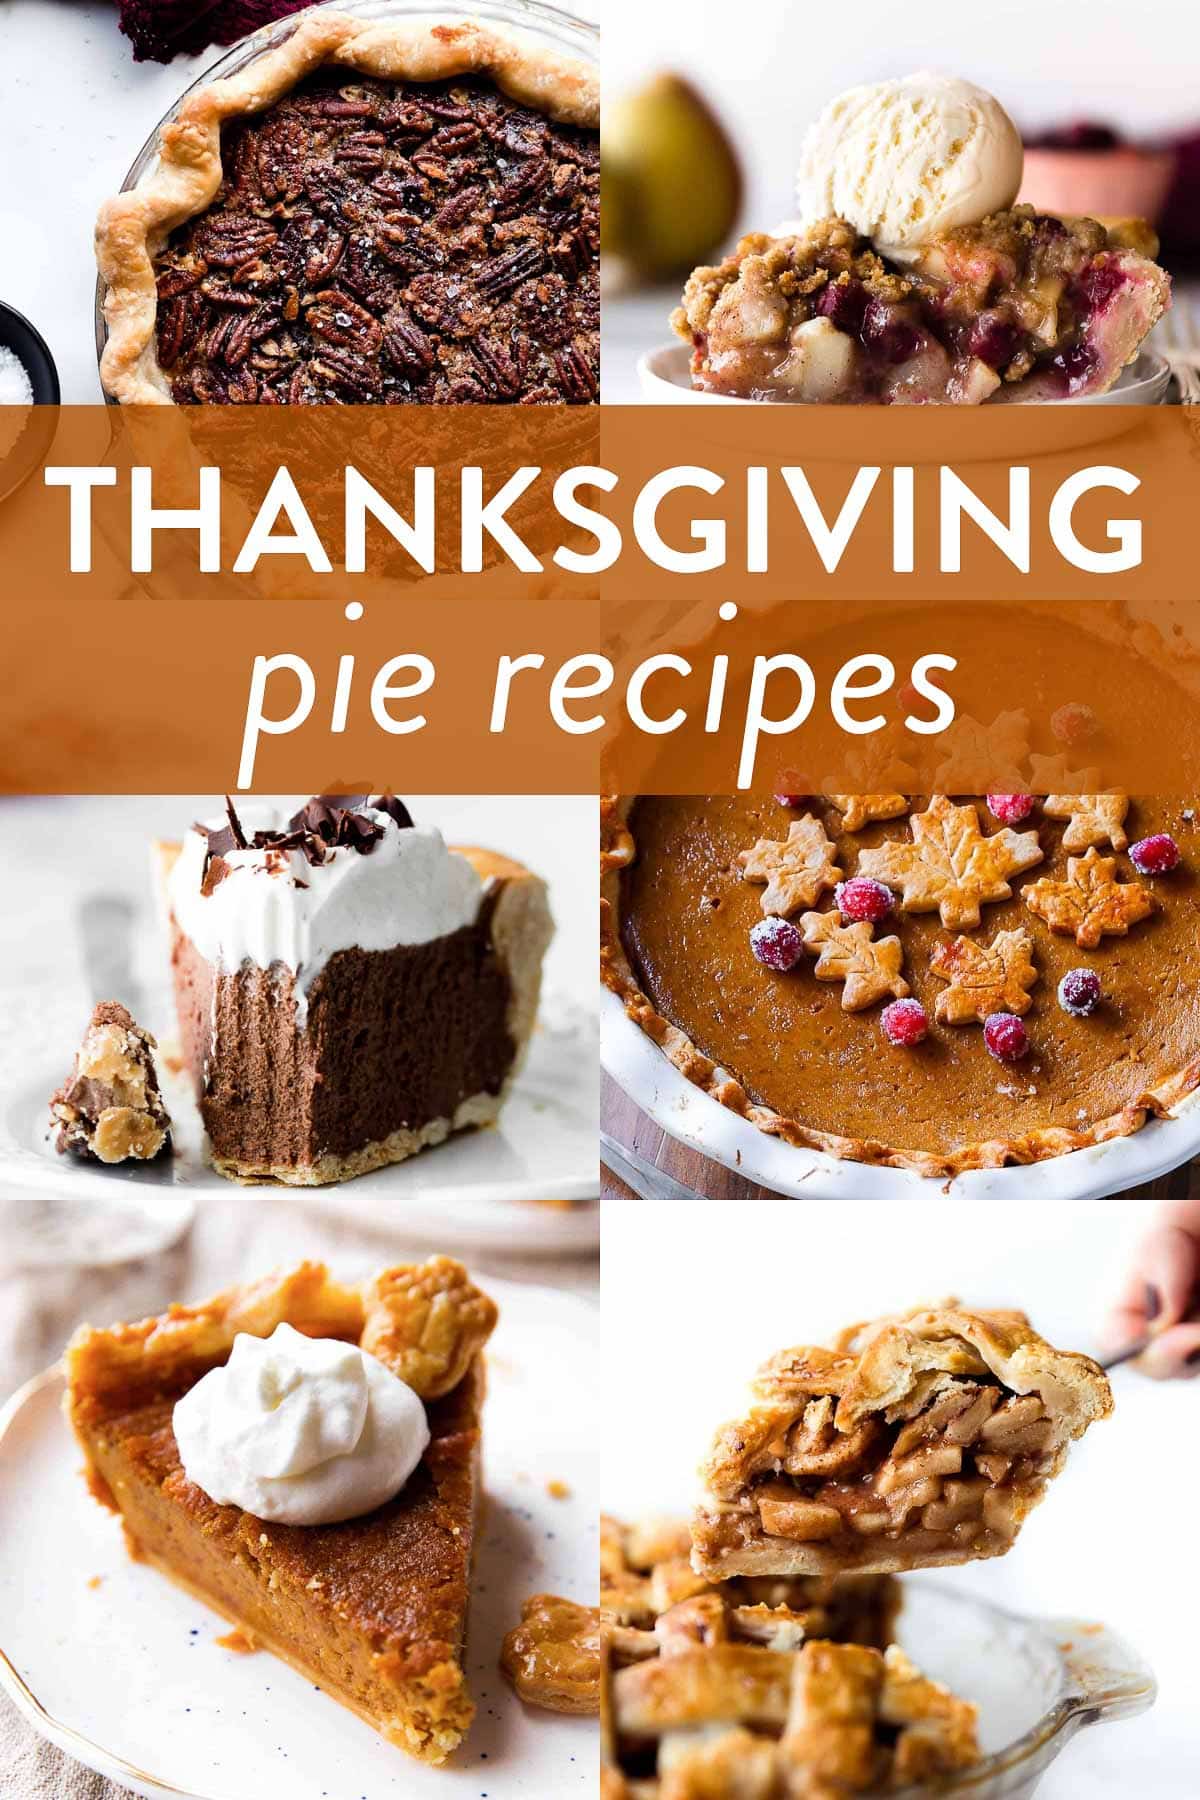 collage of Thanksgiving pie recipes including photos of maple pecan pie, cranberry pear crumble pie, French silk pie, pumpkin pie, sweet potato pie, and apple pie.